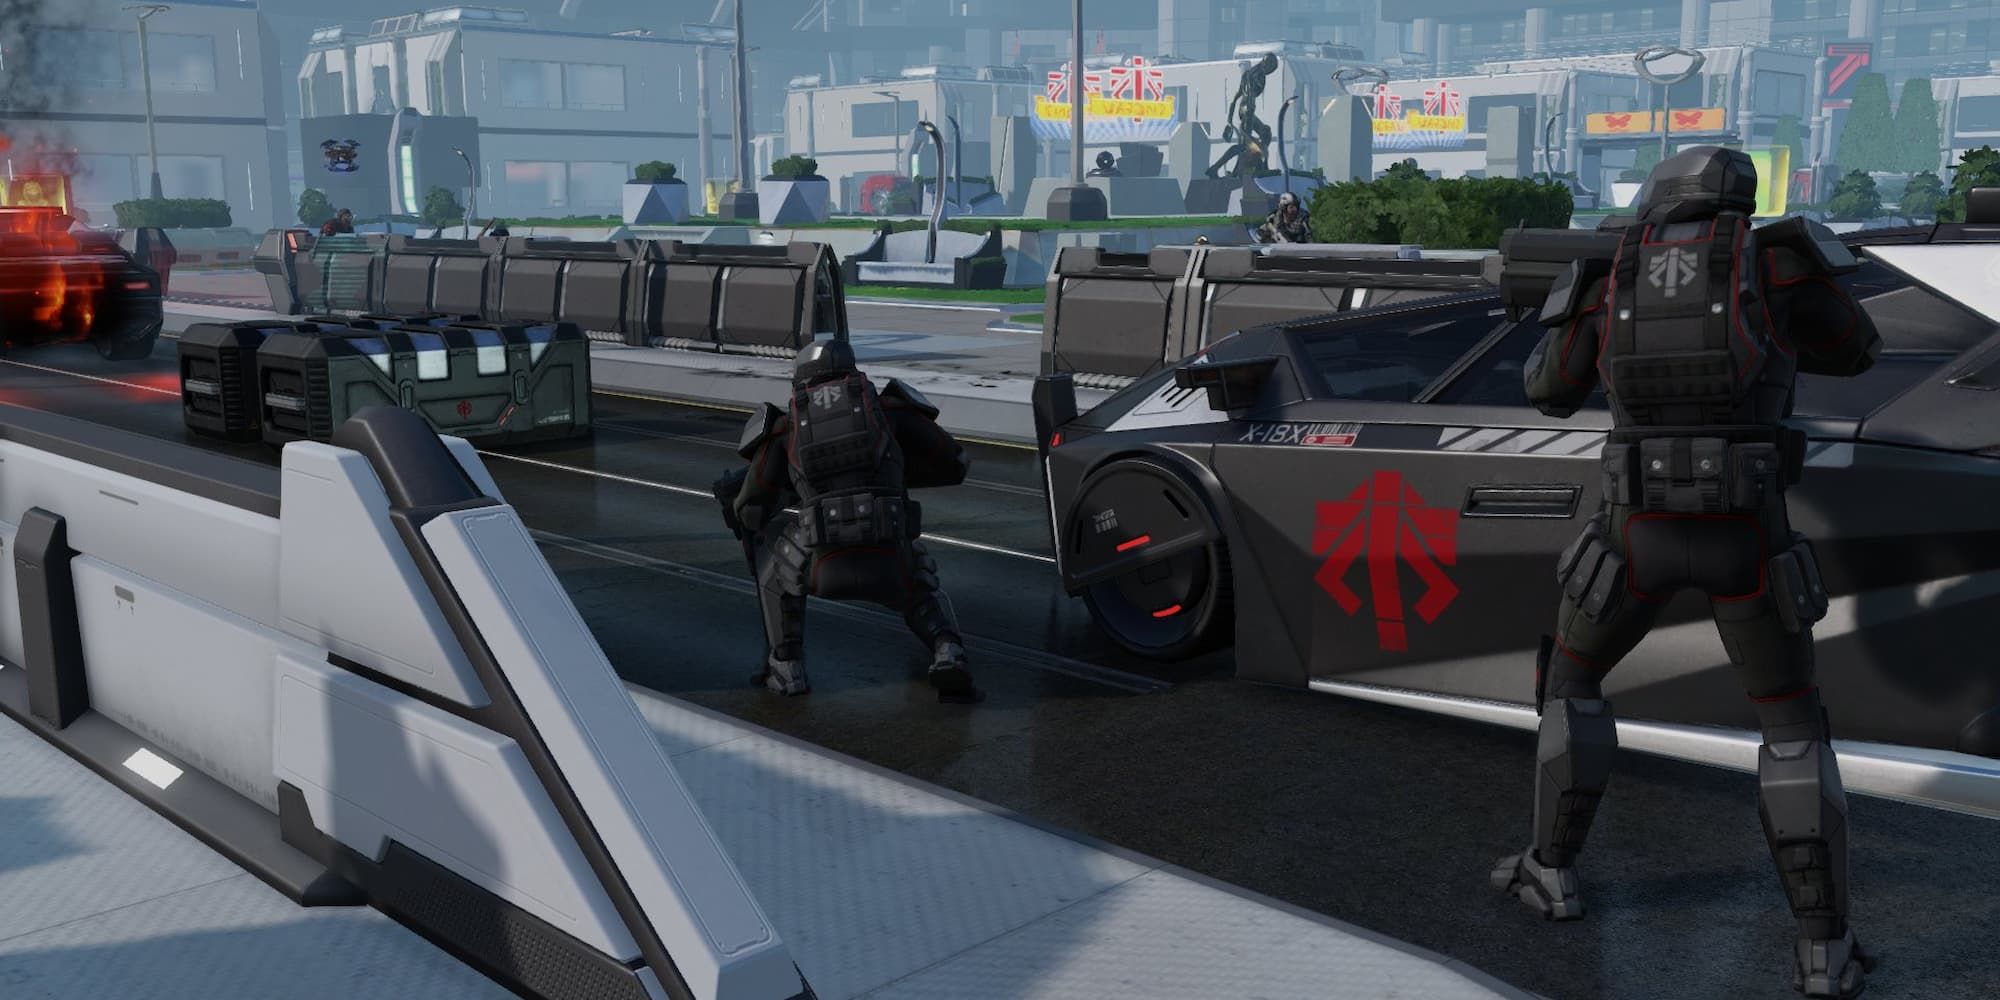 Soldiers hold position on a city street in XCOM 2.